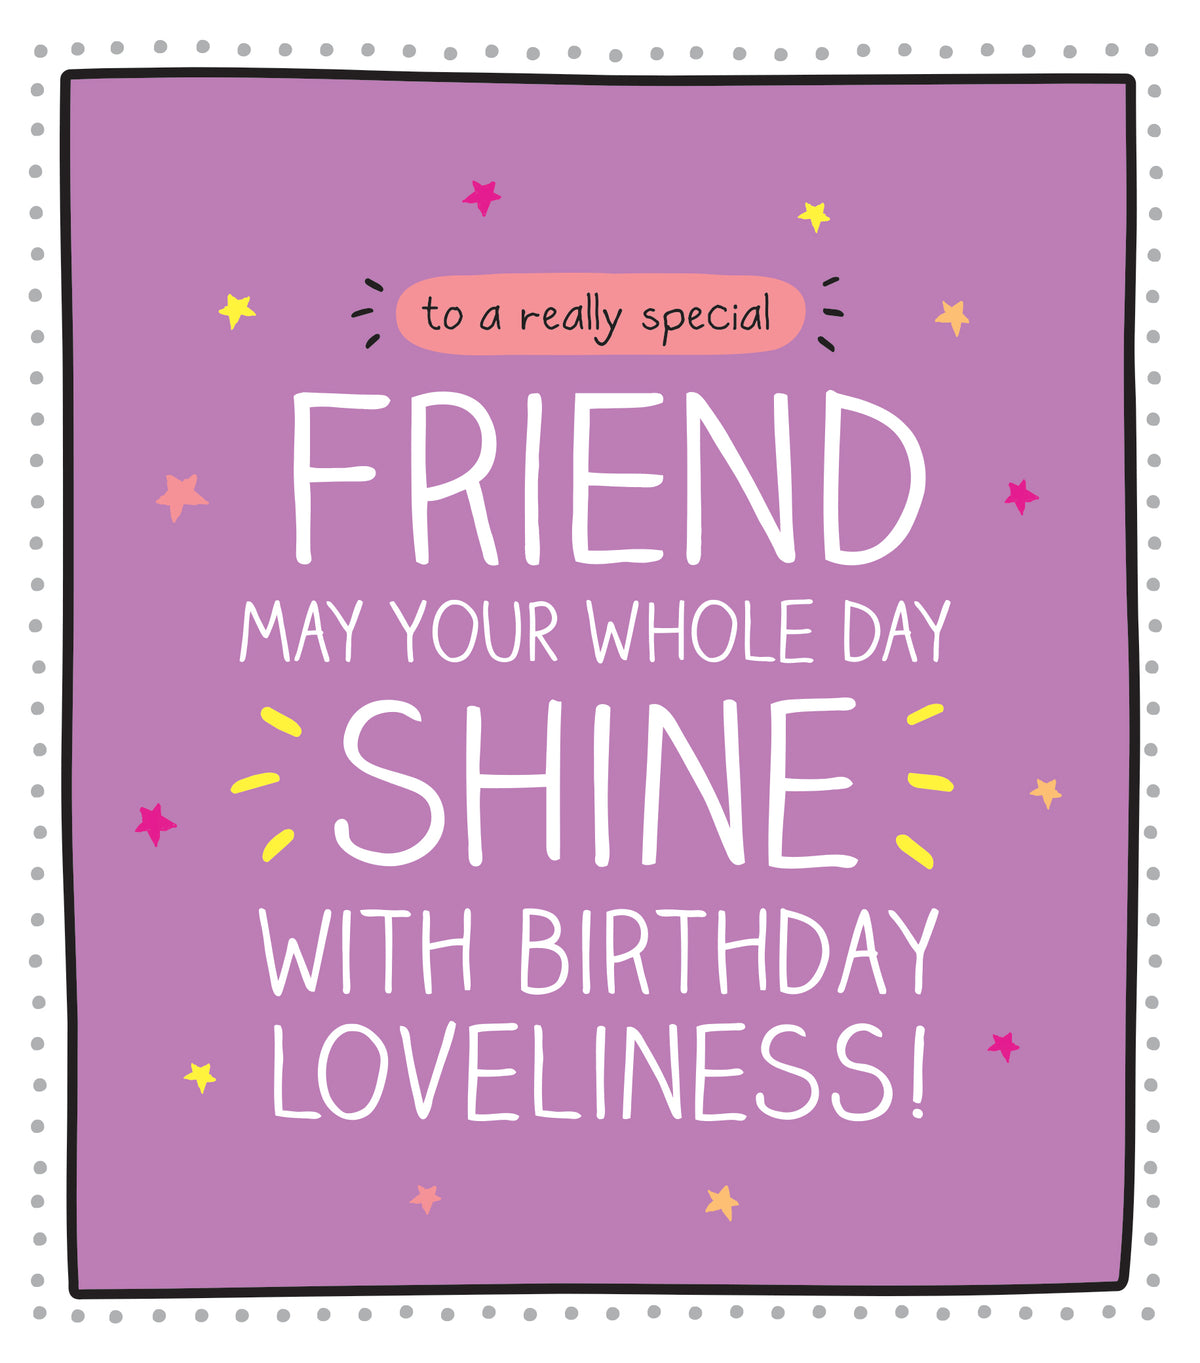 Special Friend Whole Day Shine Birthday Card from Penny Black